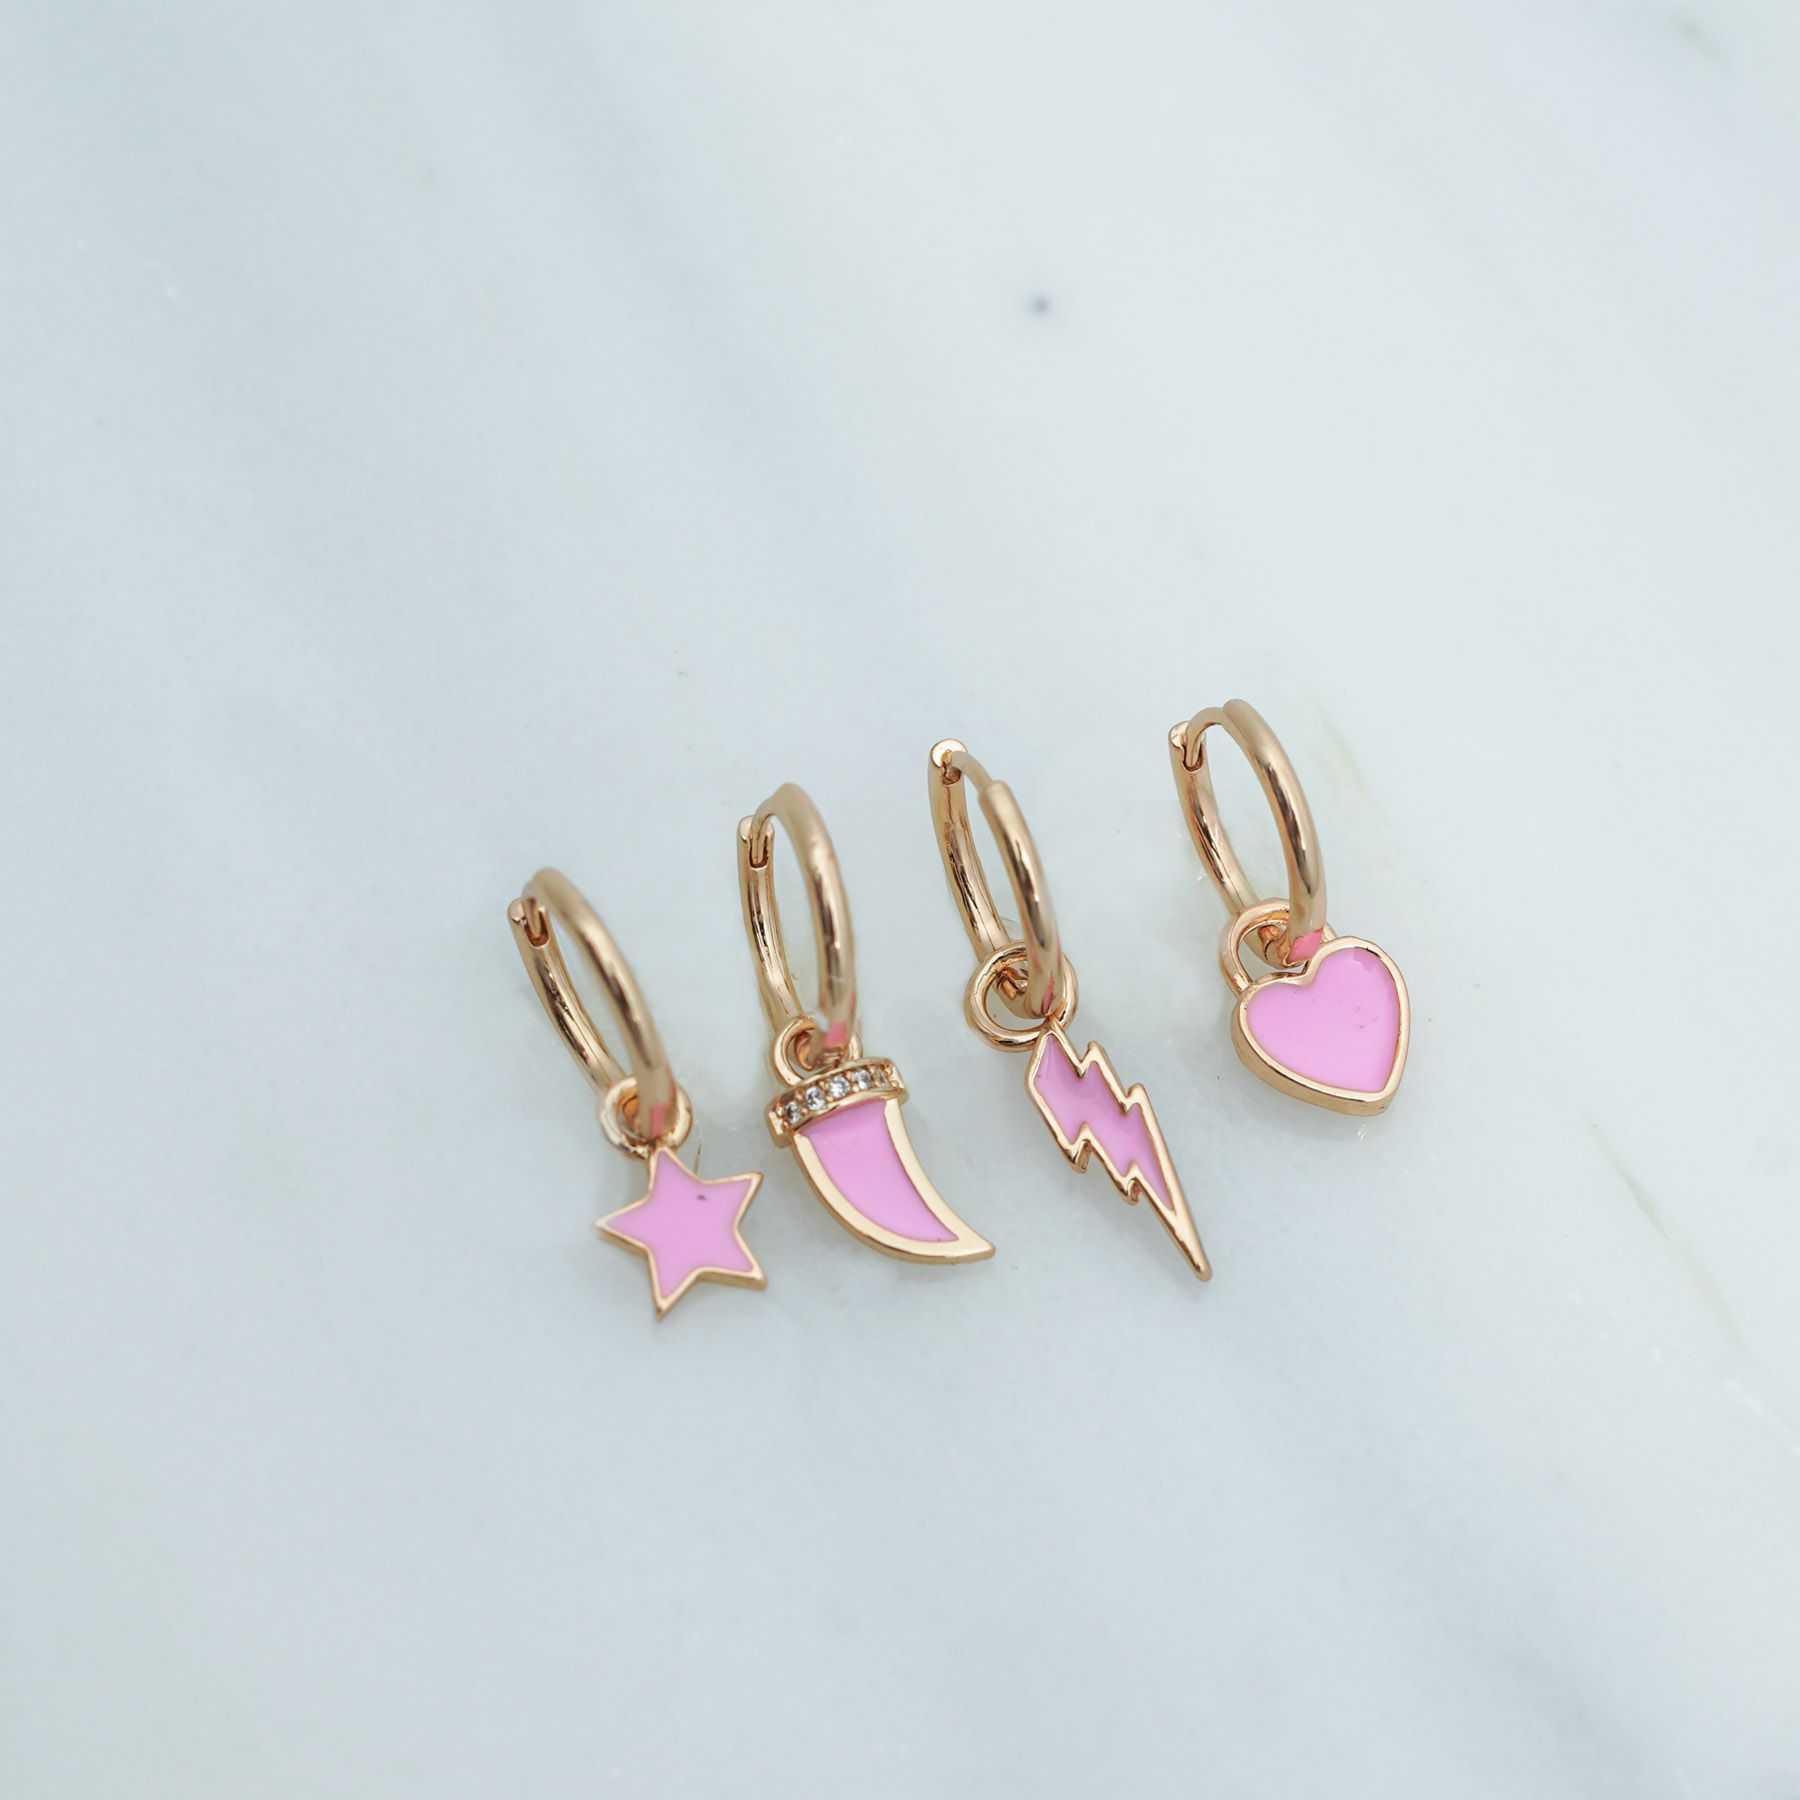 SUGAR SET OF FOUR EARRINGS - GOLD & PINK